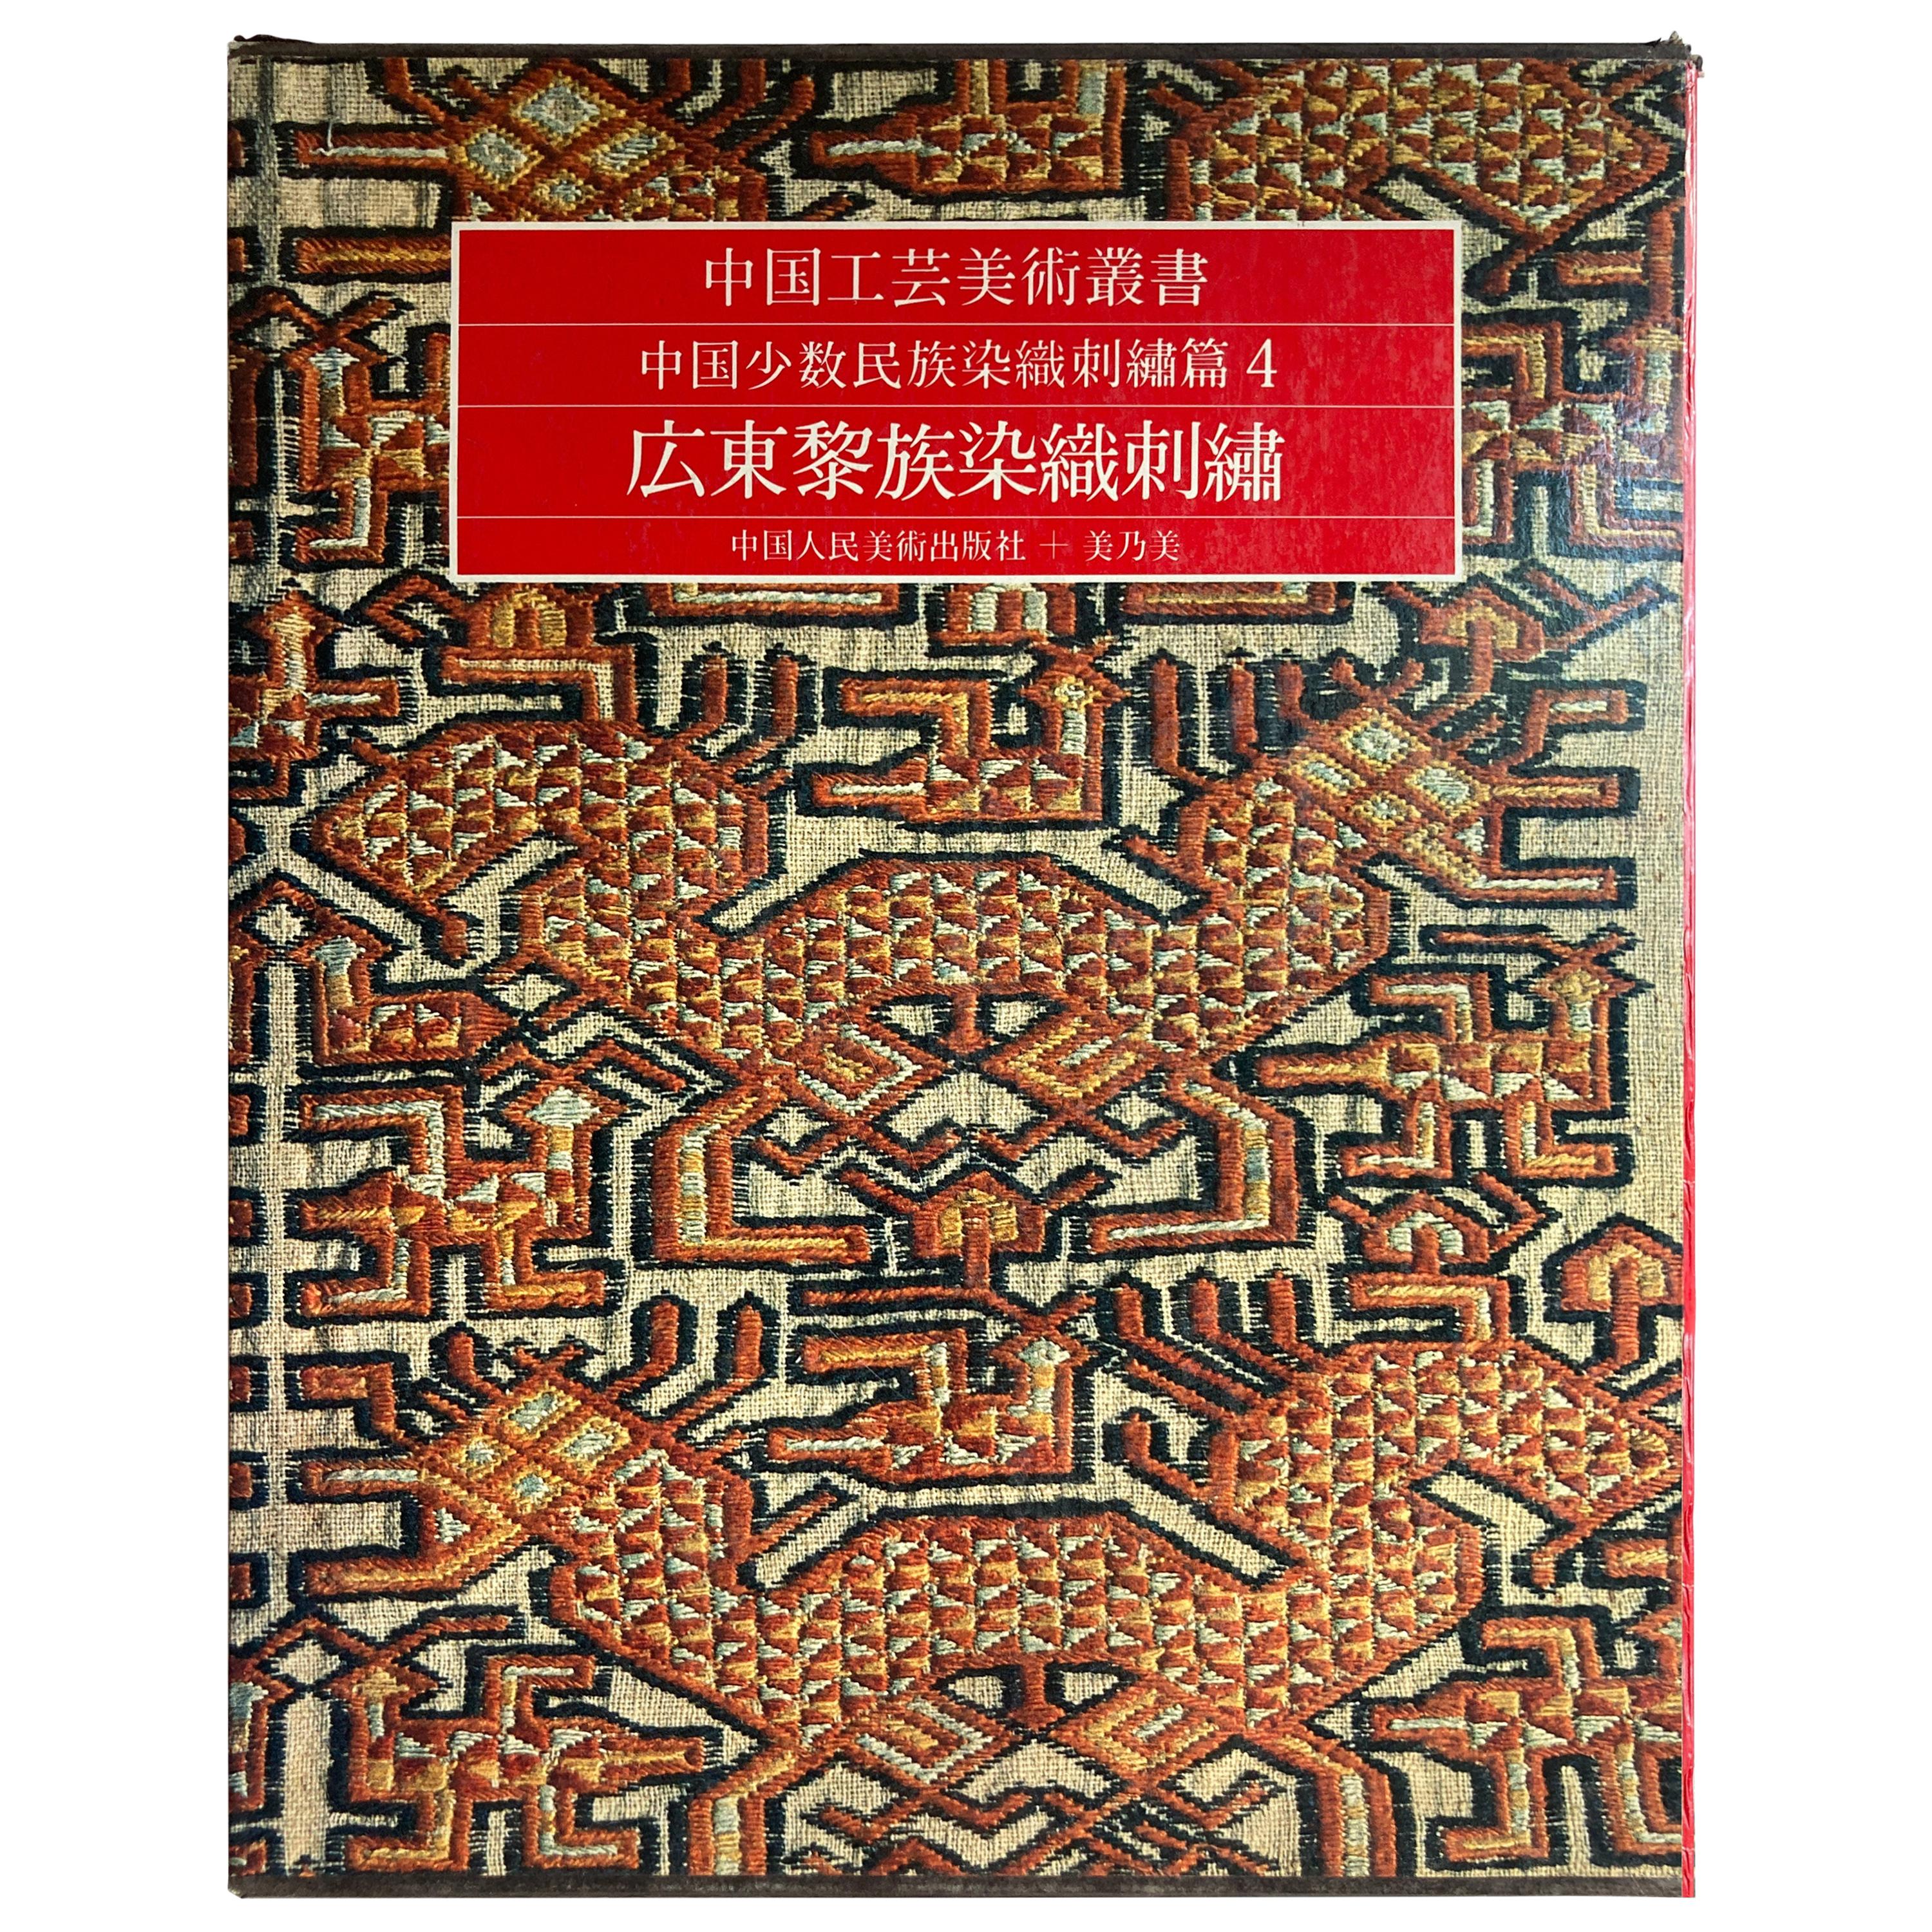 Chinese Antique Textiles and Embroidery Edition in Chinese